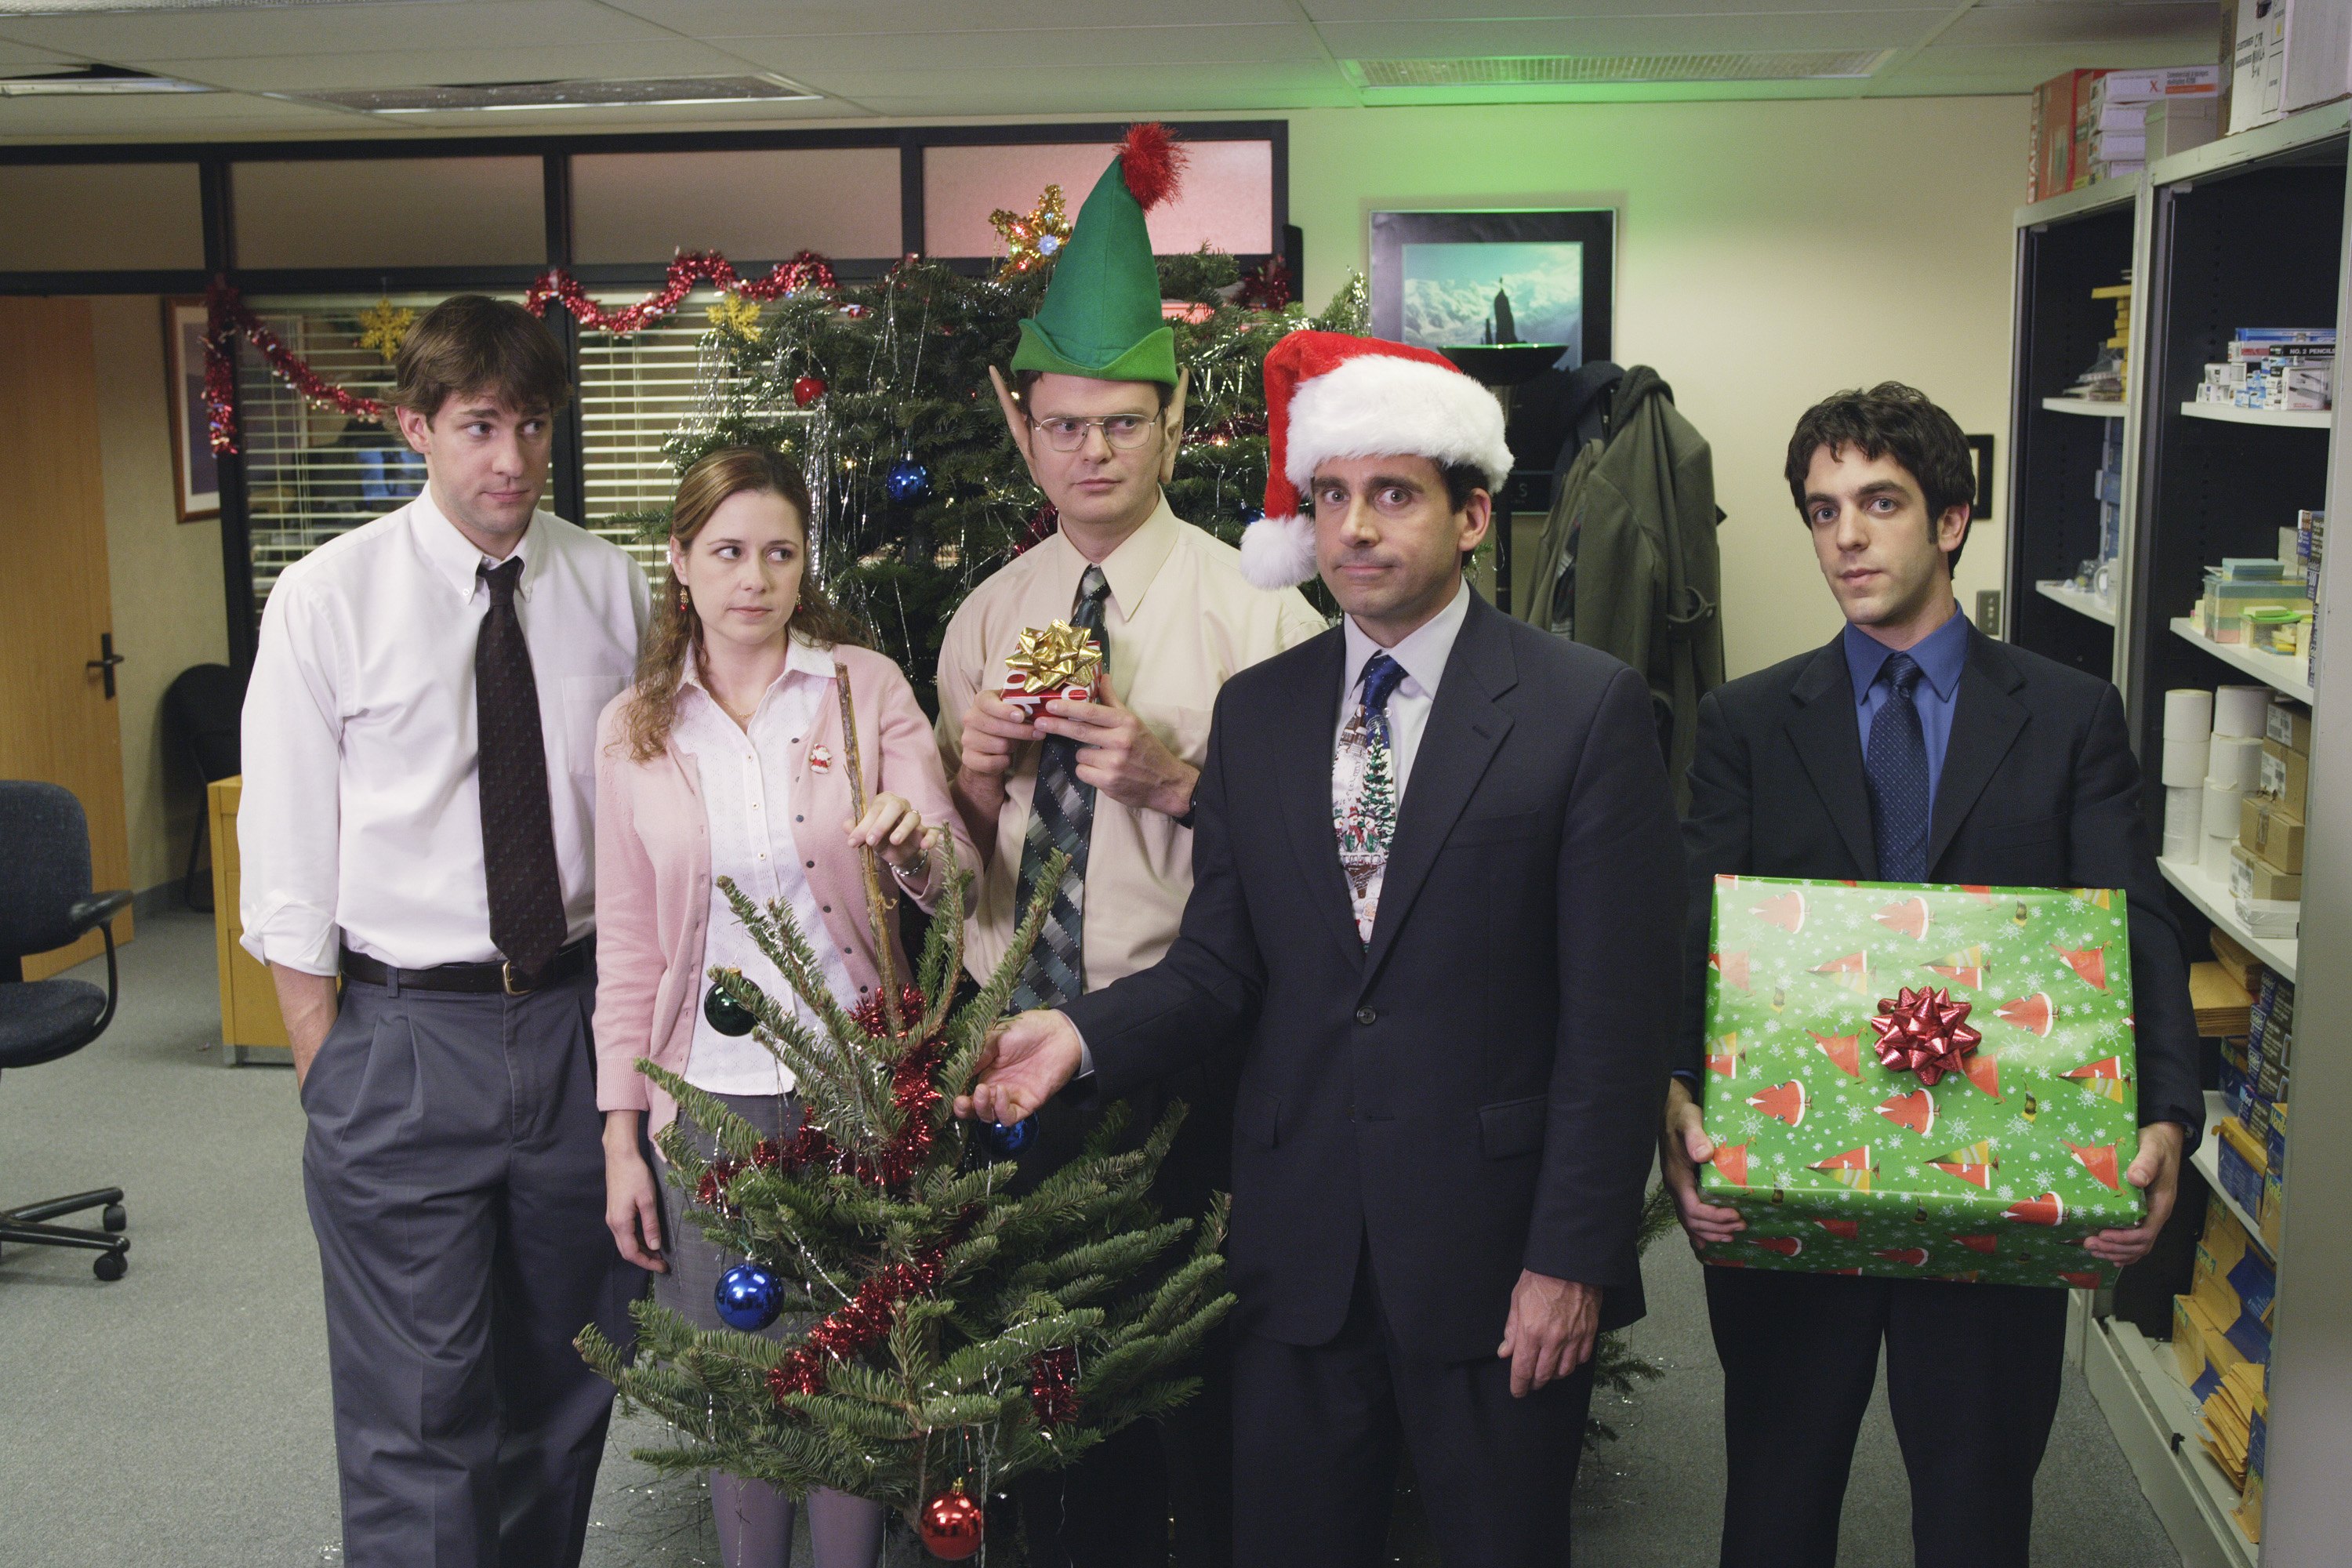 Tips on How to Behave at Office Holiday Parties | Money